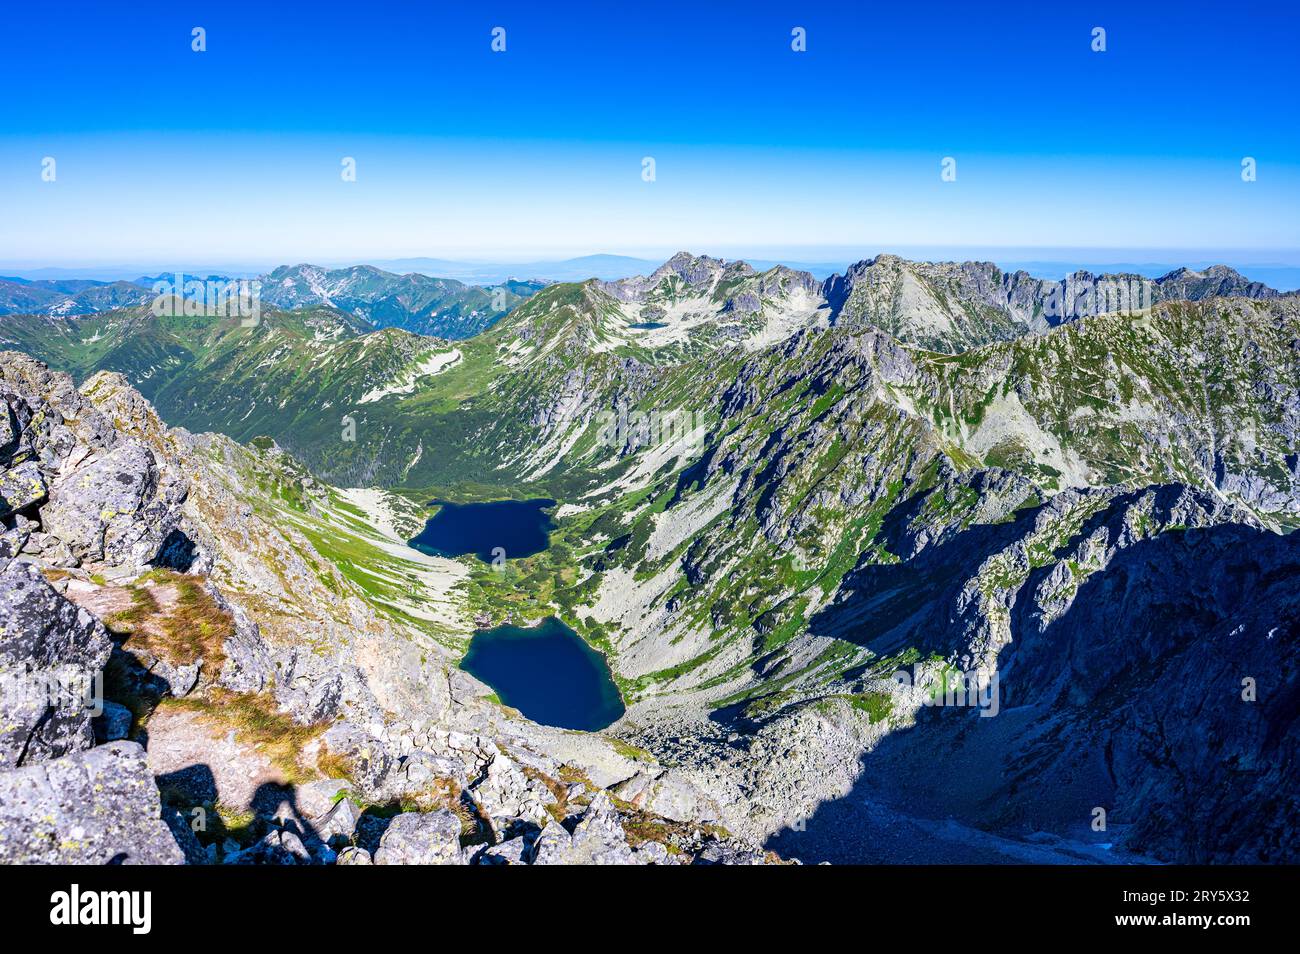 A view of the High Tatras with the Temnosmrecenske lakes from the Koprovsky Stit, Slovakia. Stock Photo